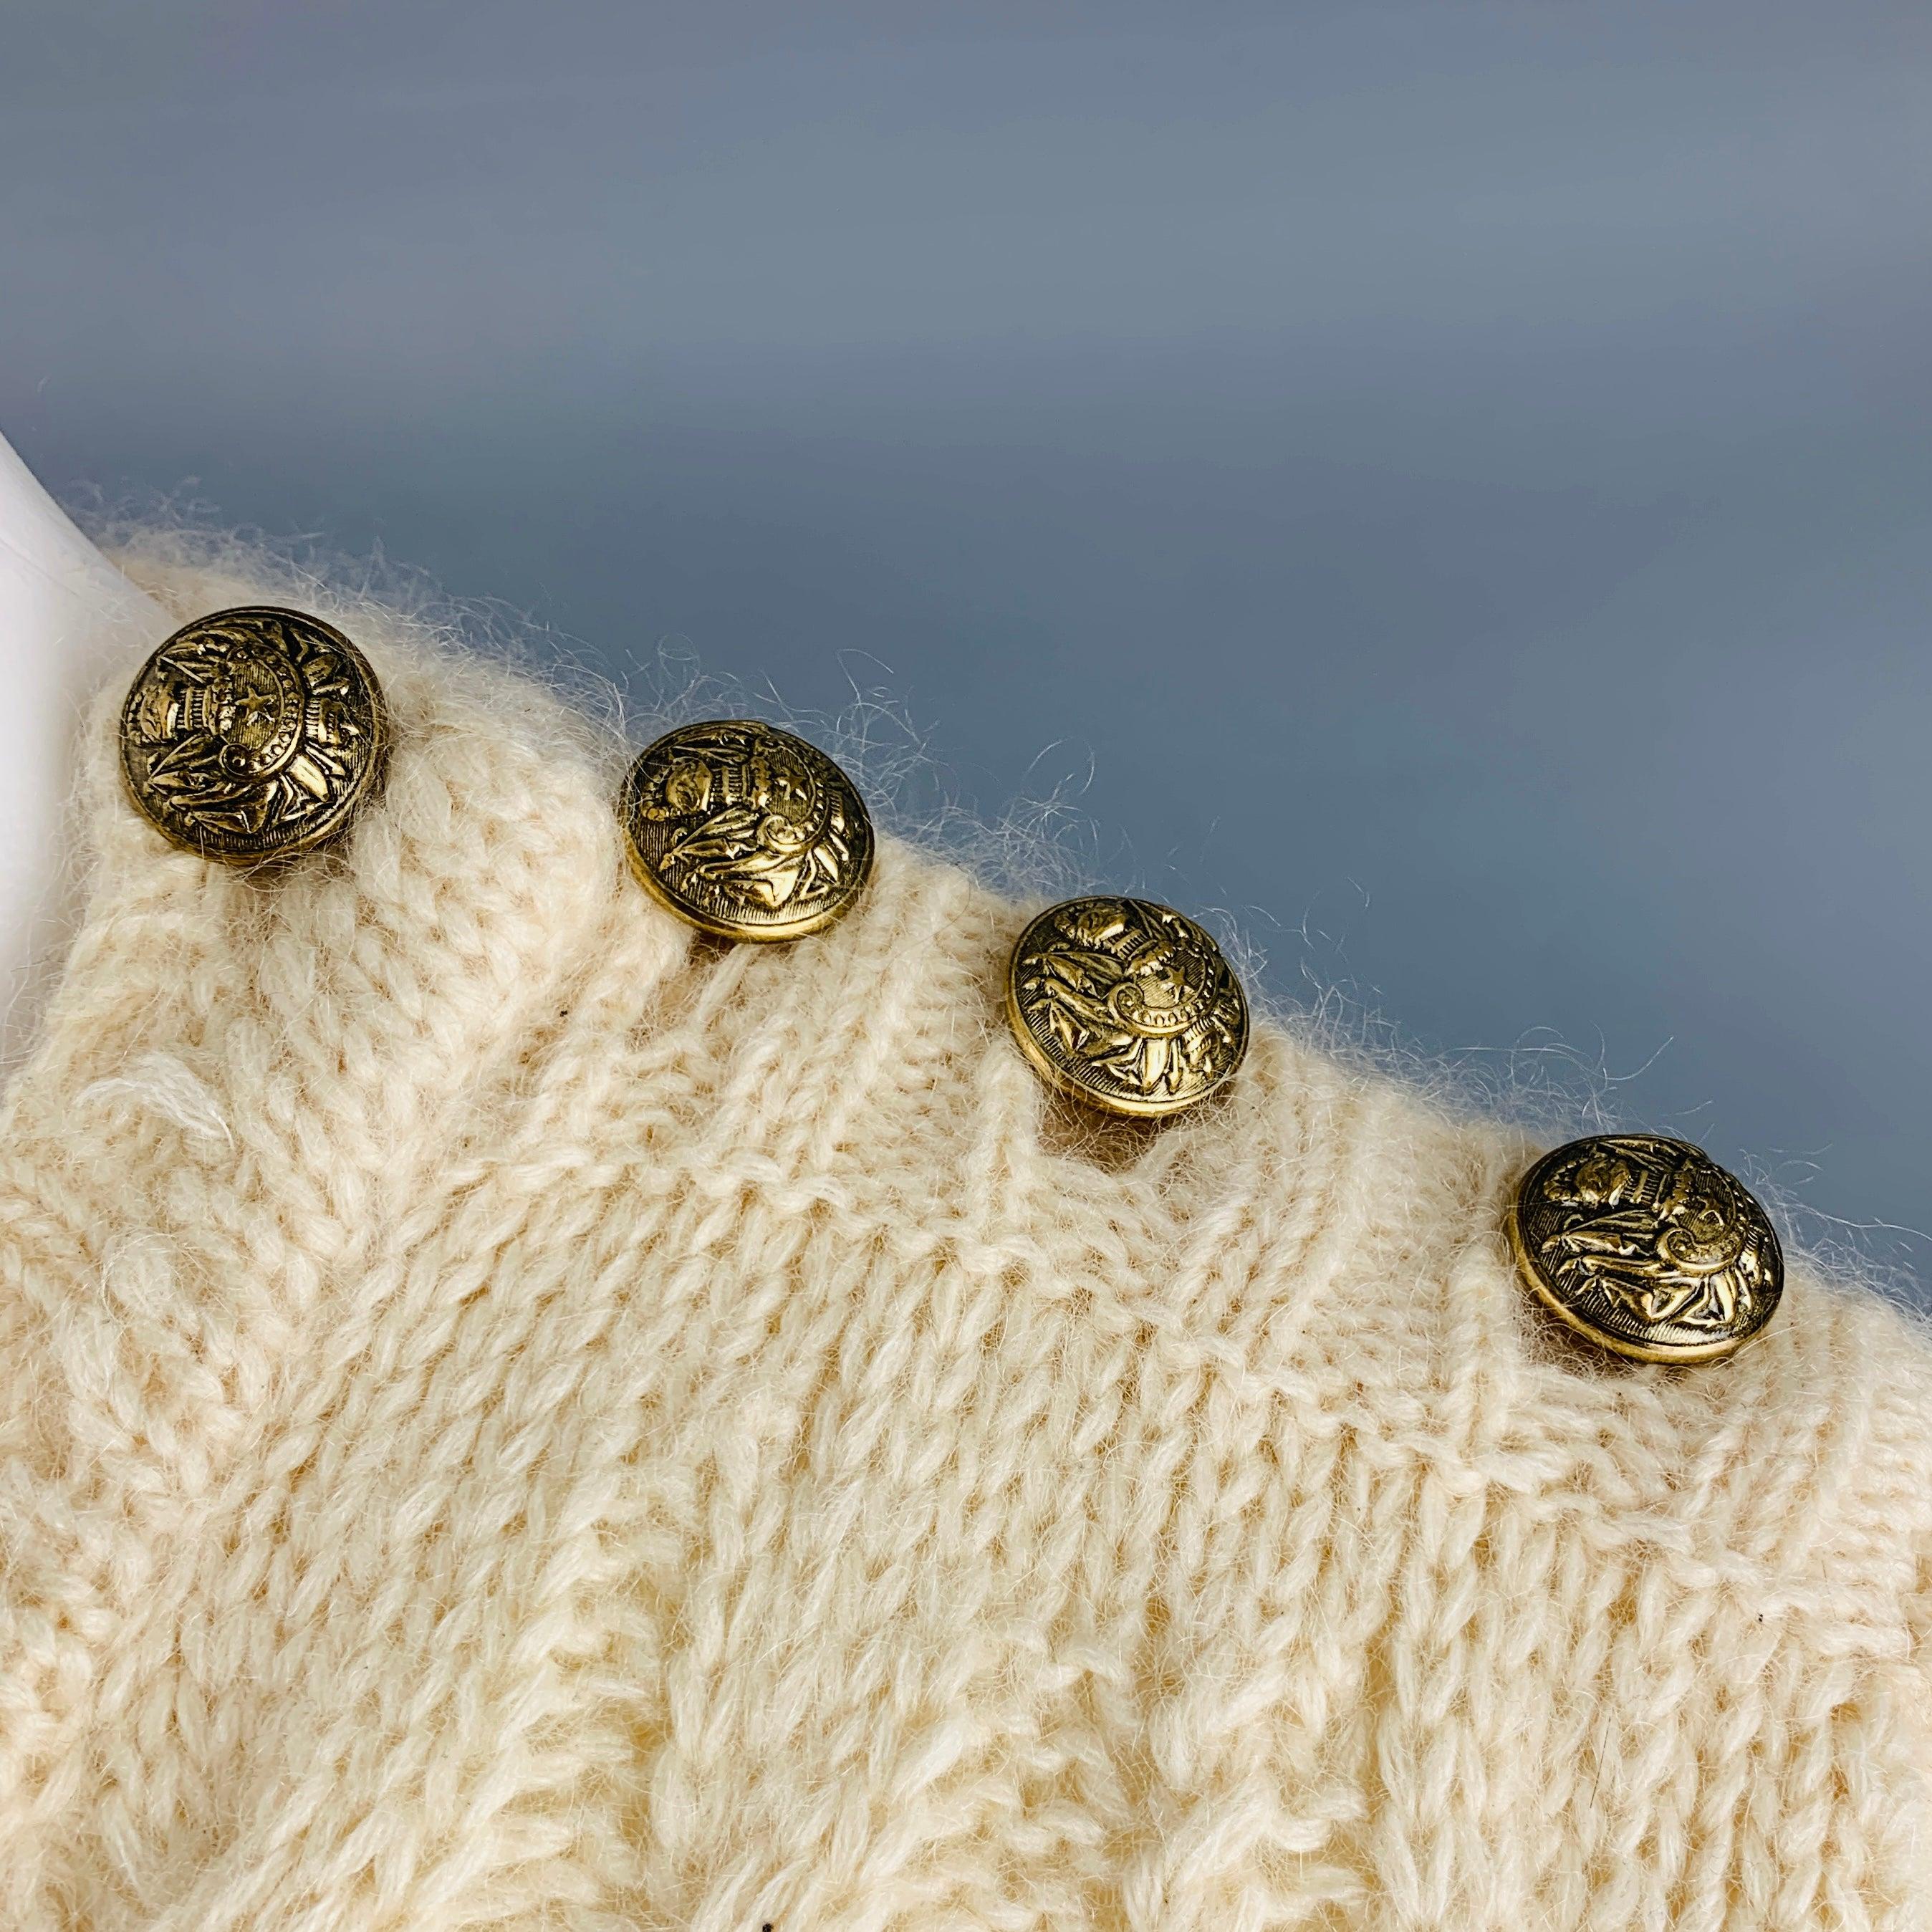 BALMAIN sweater
in a
mohair blend cable knit featuring a chunky style, four large gold tone crest buttons on left shoulder, and crew neck. Made in France.Very Good Pre-Owned Condition. Minor marks. 

Marked:   S 

Measurements: 
 
Shoulder: 19